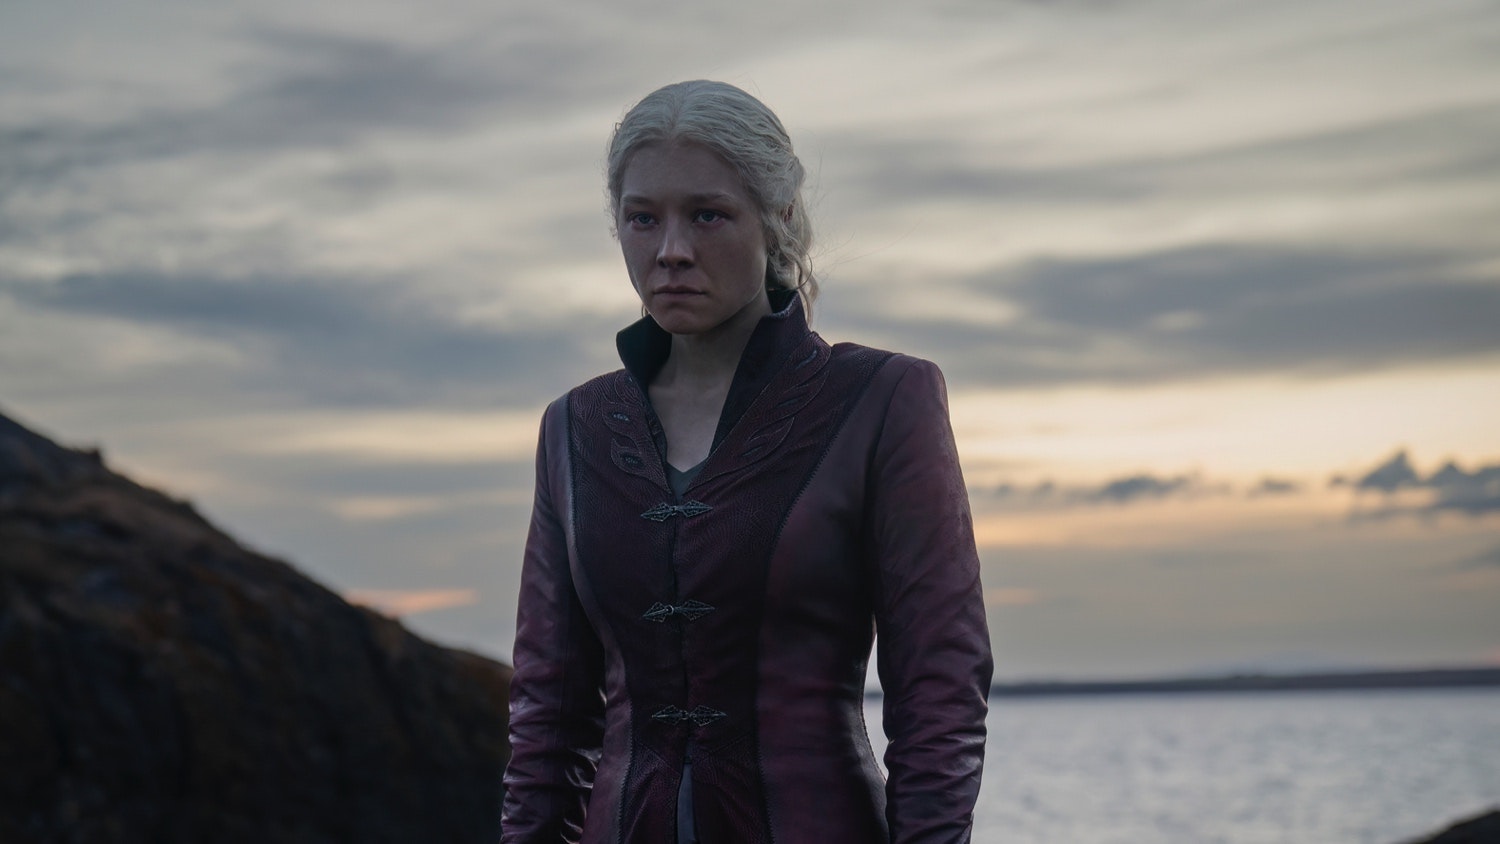 Game of Thrones prequel: what can we learn from the first images